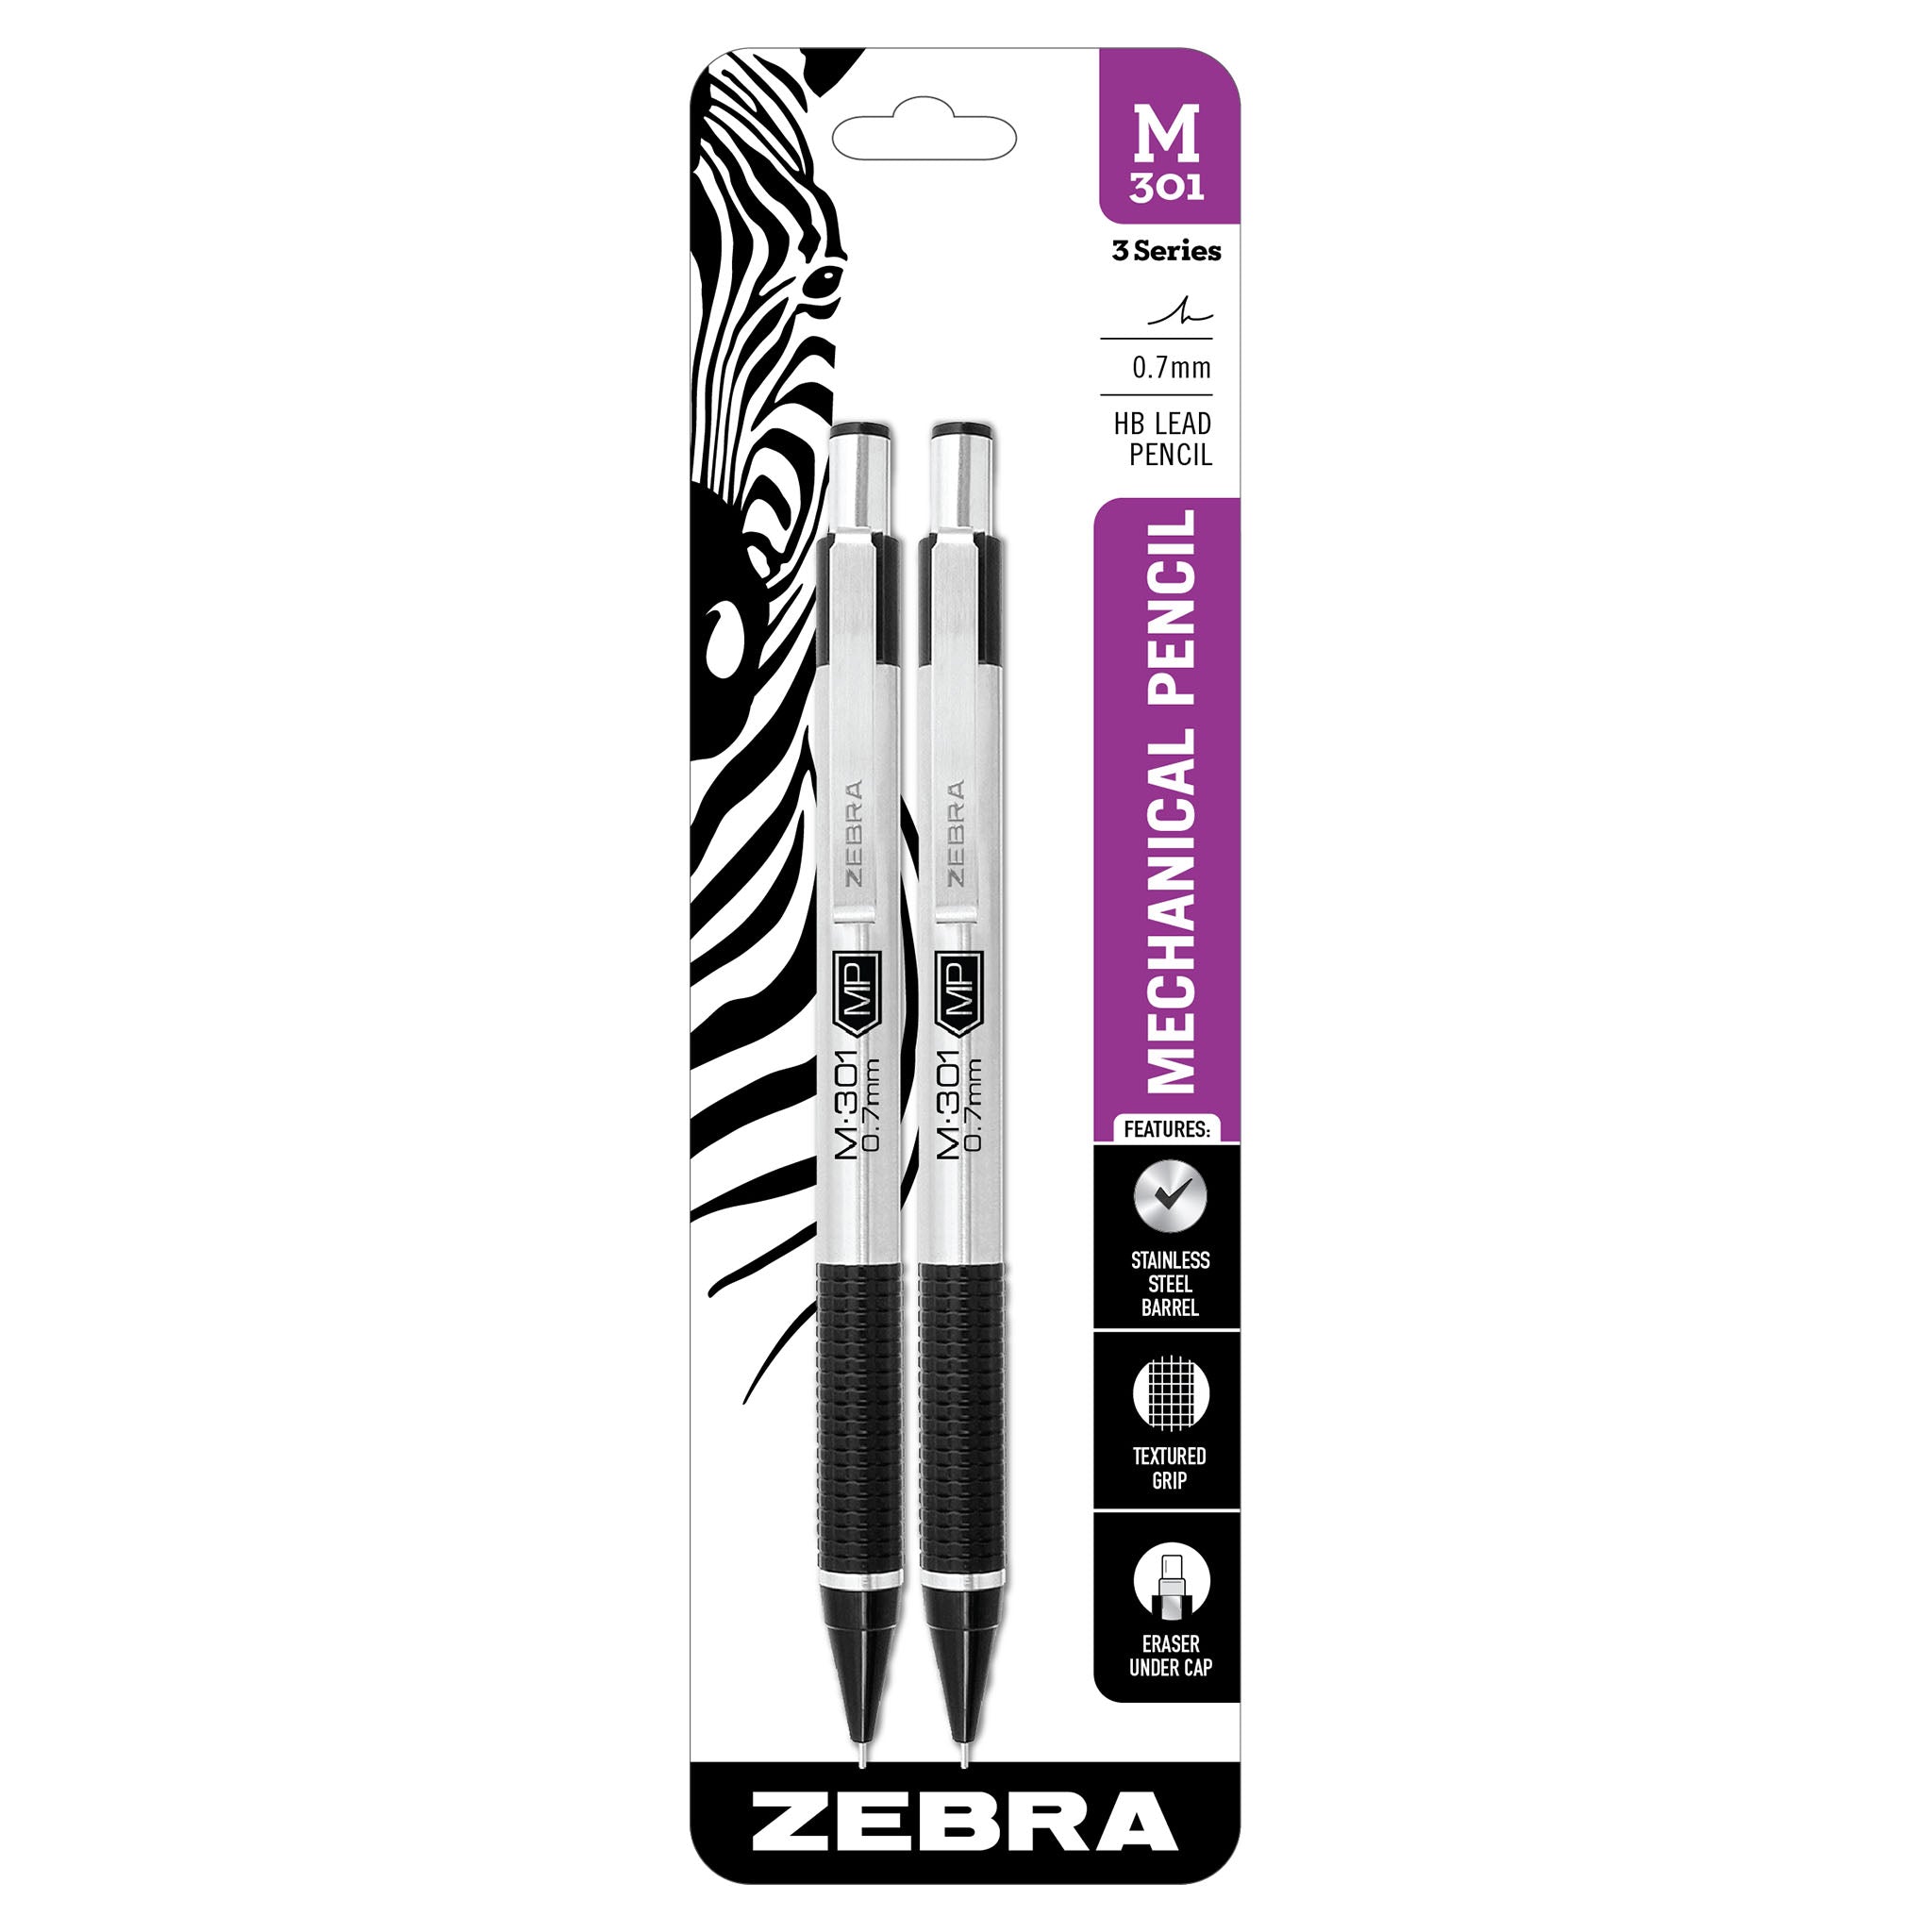 Pencil-style Grip Eraser Retractable Mechanical Eraser Pen With 2 Refills  for Drawing, Art, Drafting & Sketching 